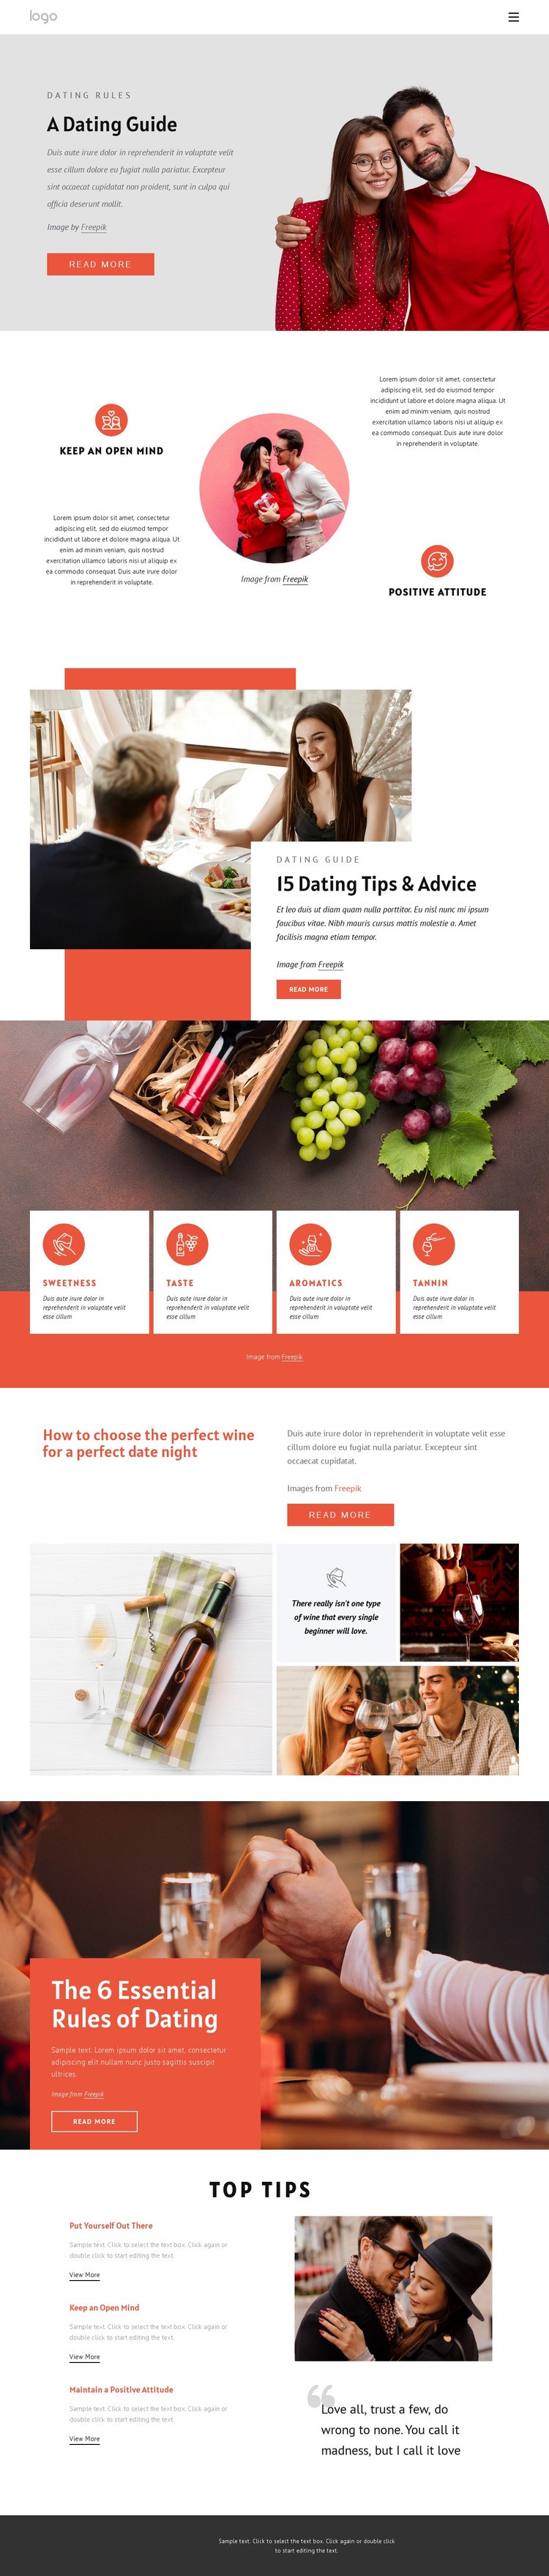 Dating guide Homepage Design